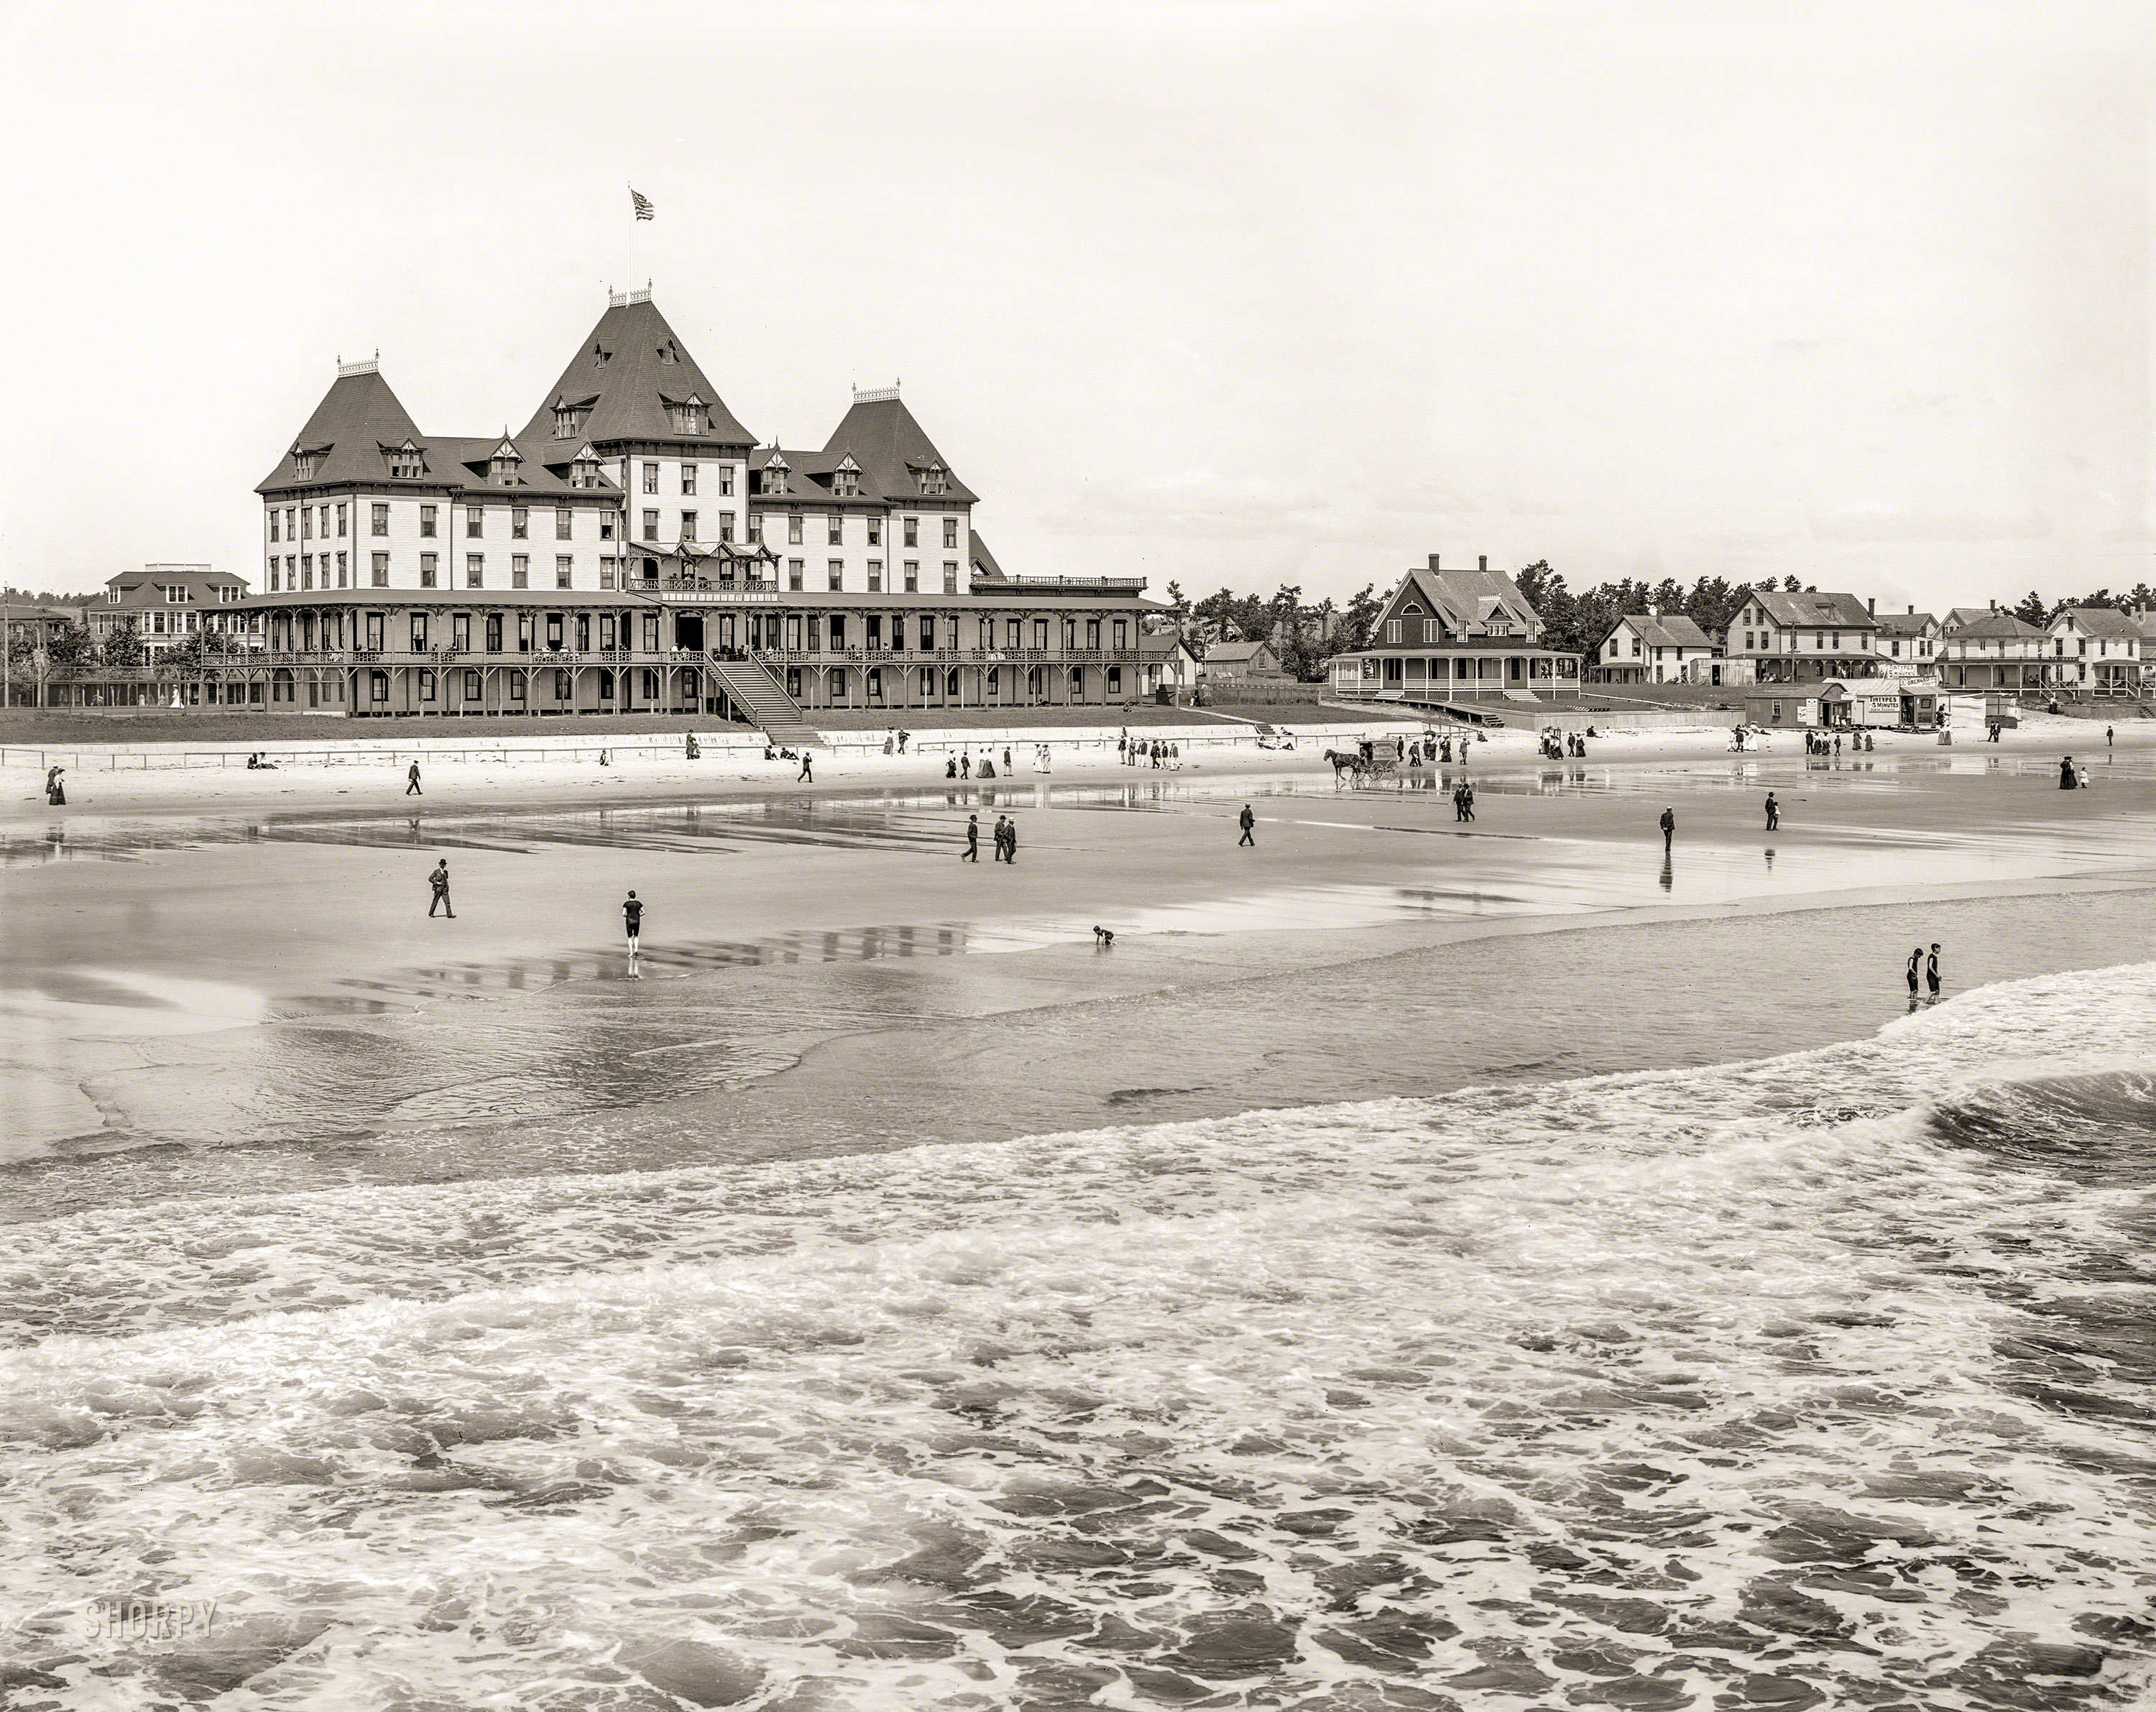 Circa 1904. "Fiske House and beach, Old Orchard, Maine." Reduced to ashes along with 16 other hotels in the Great Fire of August 15, 1907. 8x10 inch dry plate glass negative, Detroit Publishing Company. View full size.